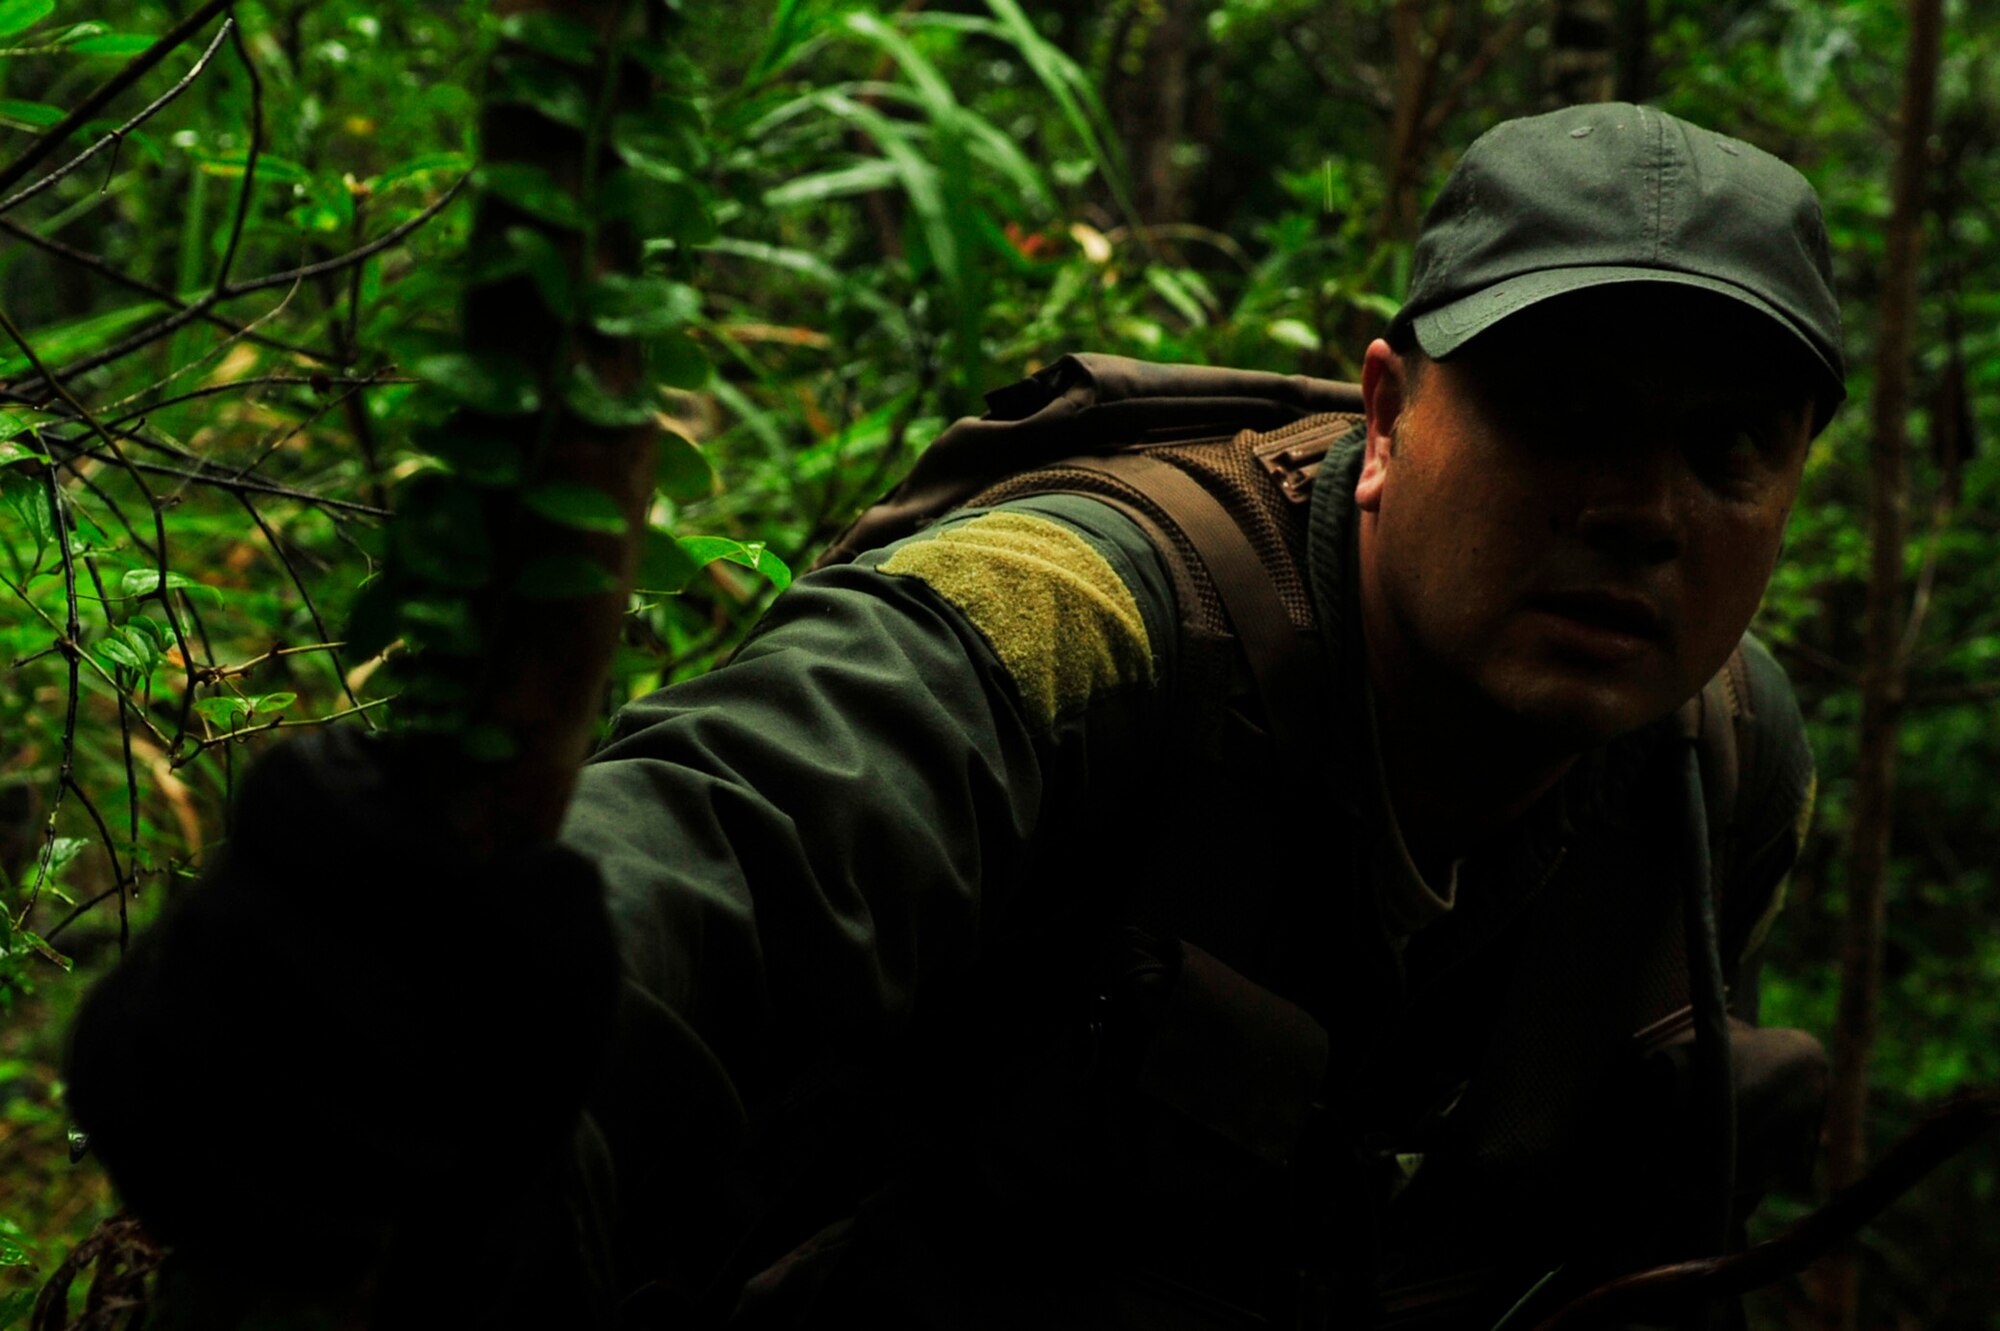 Master Sgt. John Matye, member of the 17th Special Operations Squadron, waits for the sign to move forward during a survival, evasion, resistance, and escape exercise at Kadena Air Base’s Area 1 July 1. Every three years aircrew members must undergo a refresher course of SERE training. (U.S. Air Force photo by Senior Airman Amanda Grabiec)